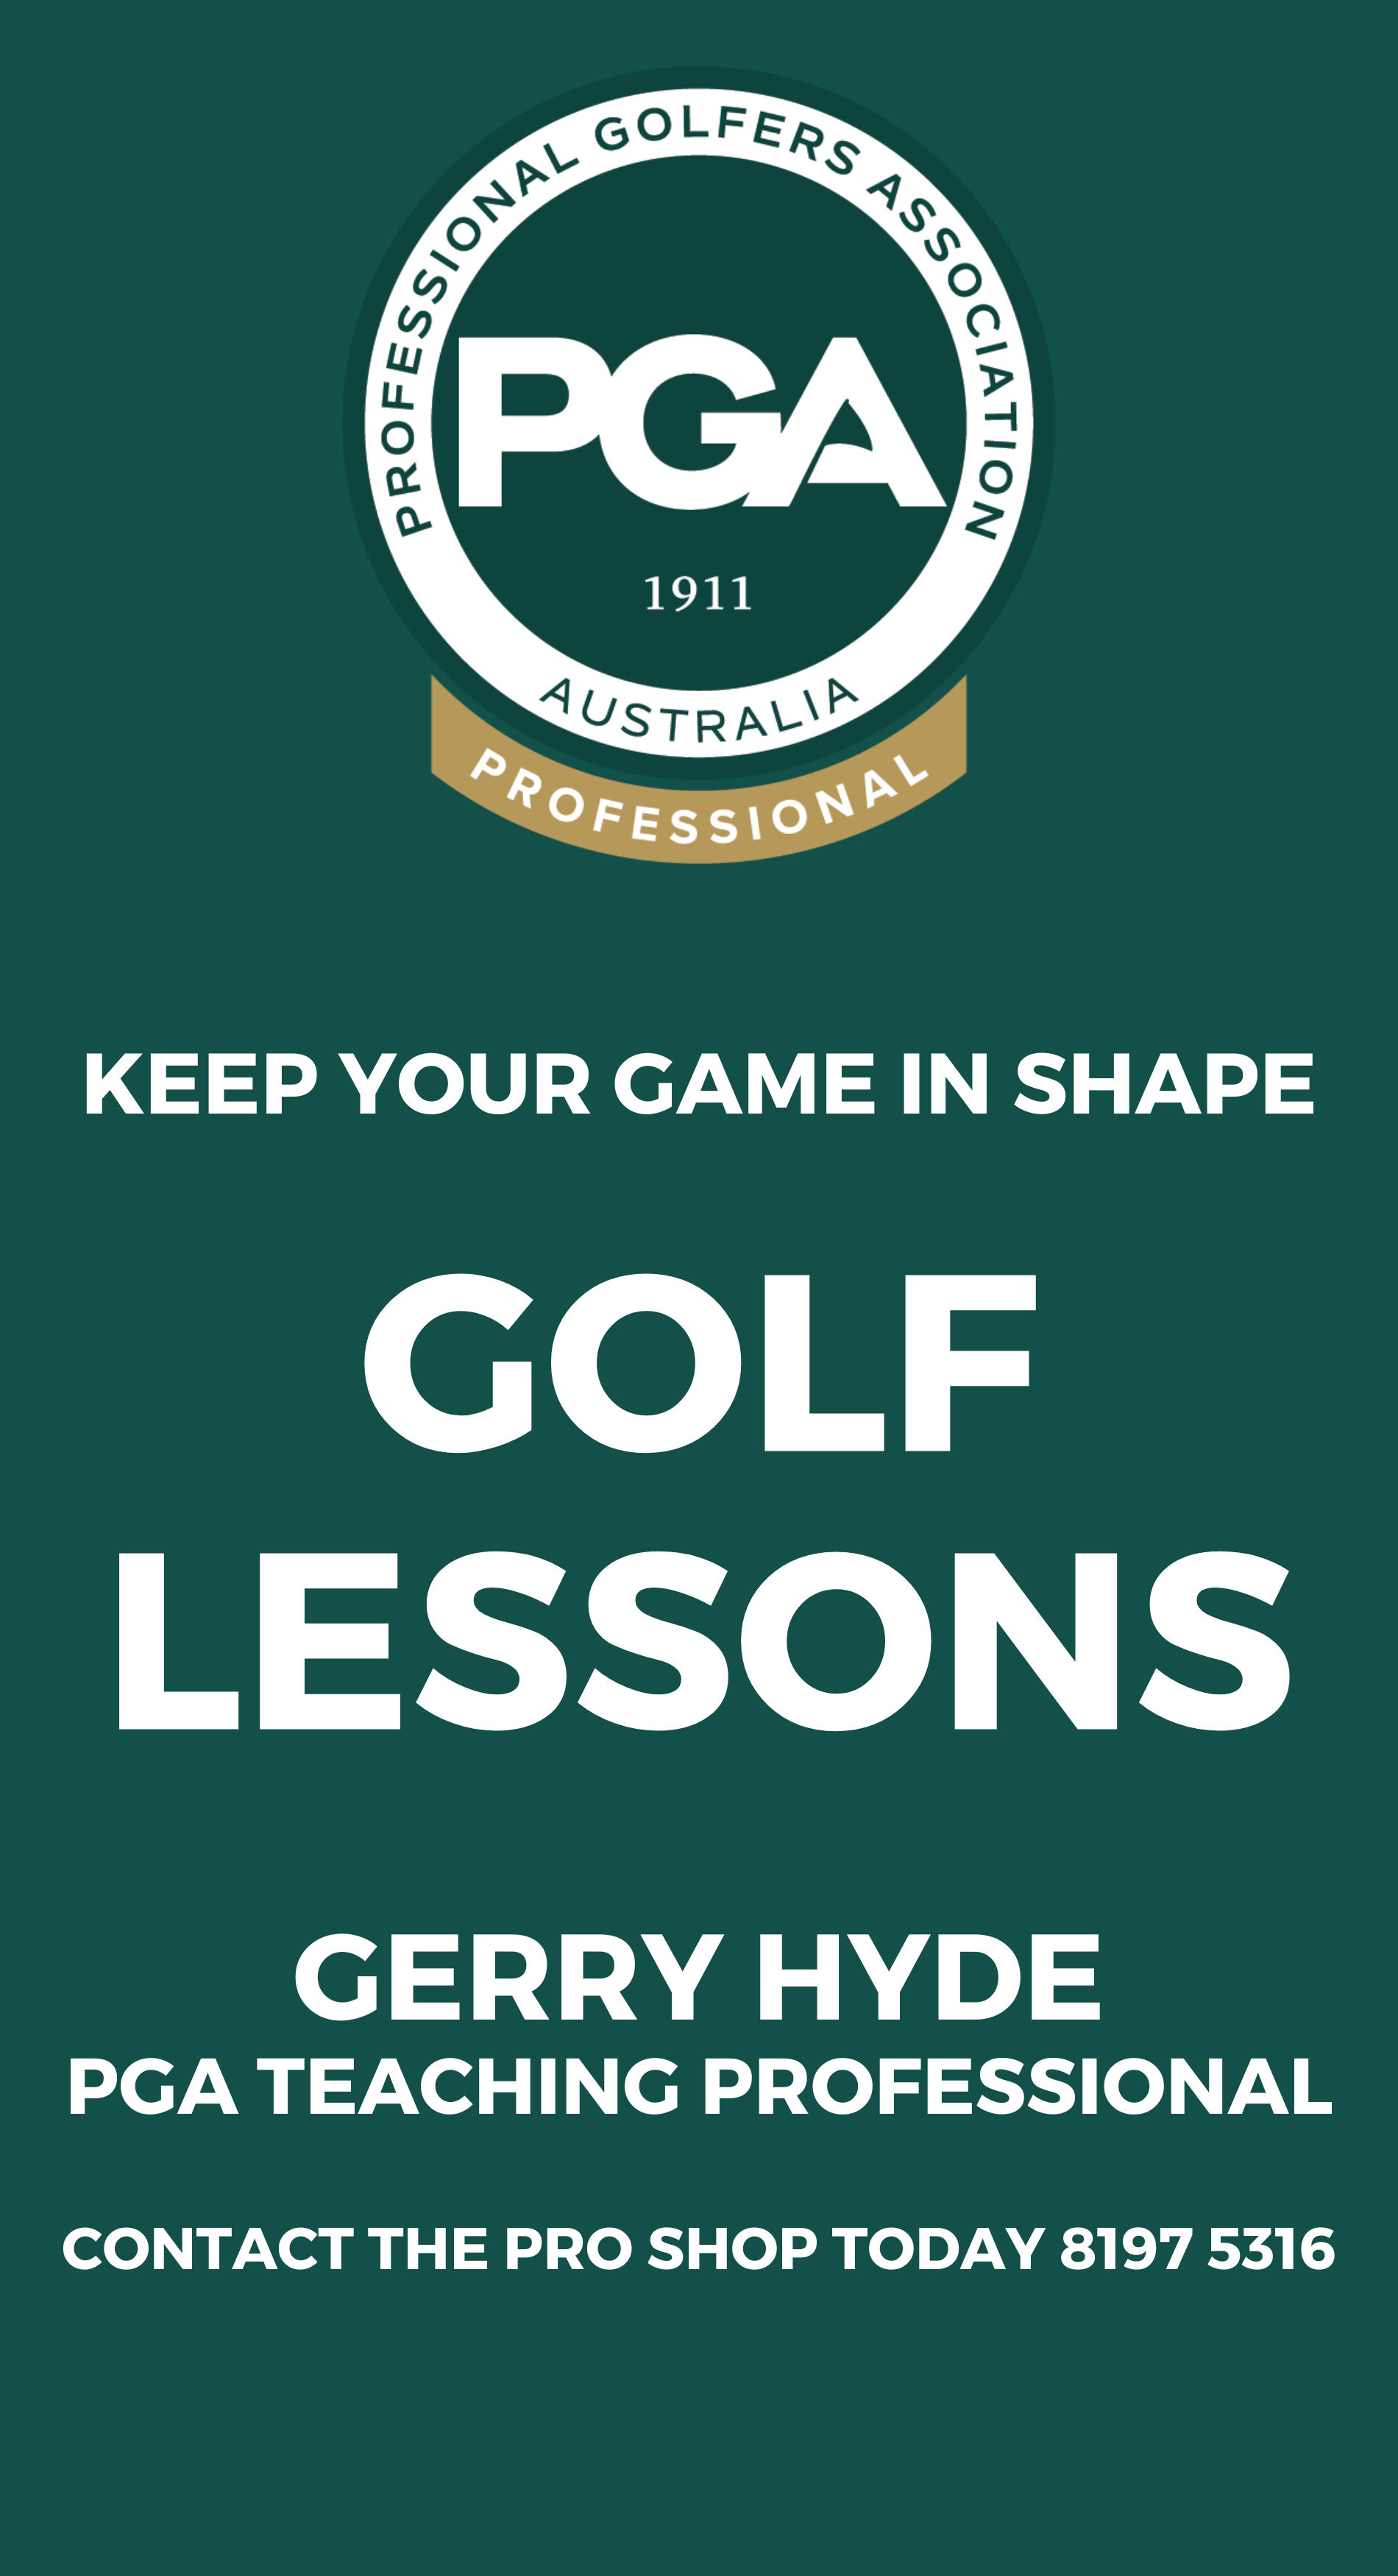 GERRY HYDE PGA TEACHING PROFESSIONAL CONTACT THE PRO SHOP TODAY 8197 5316 (1).png